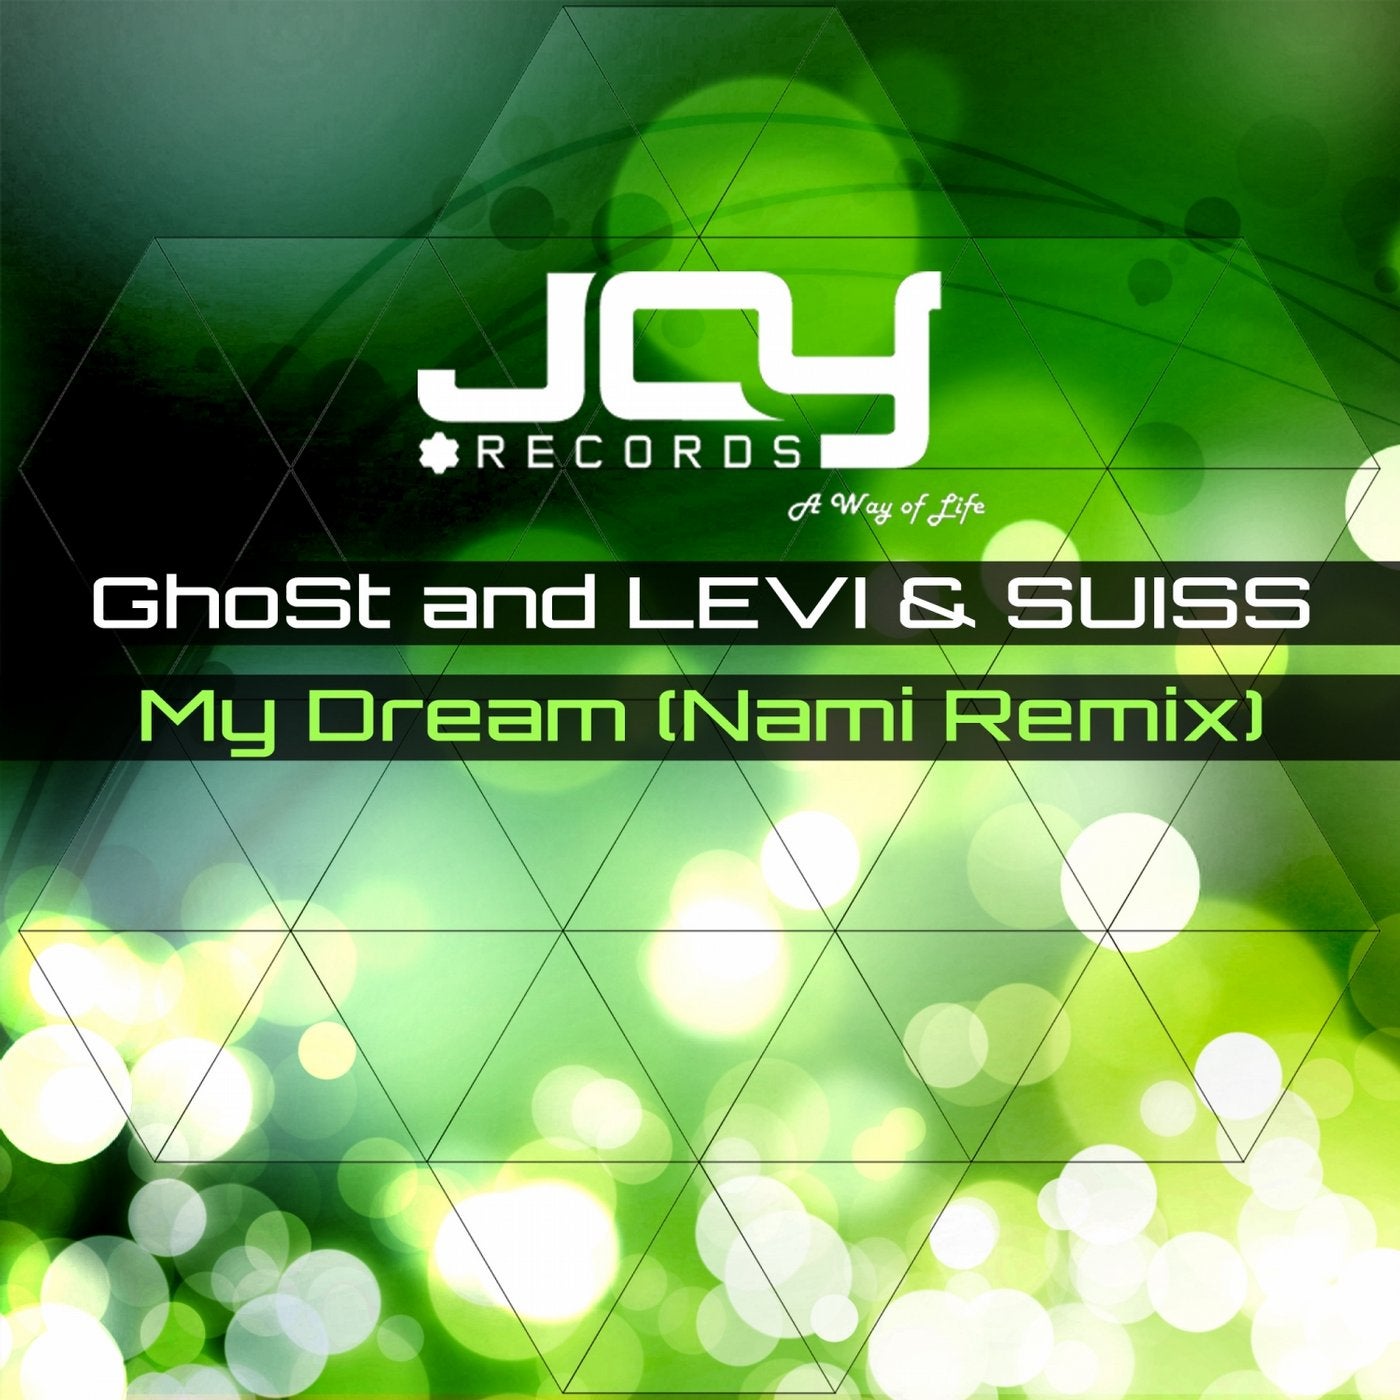 Ghost and Levi & Suiss - My Dream (Nami Remix)